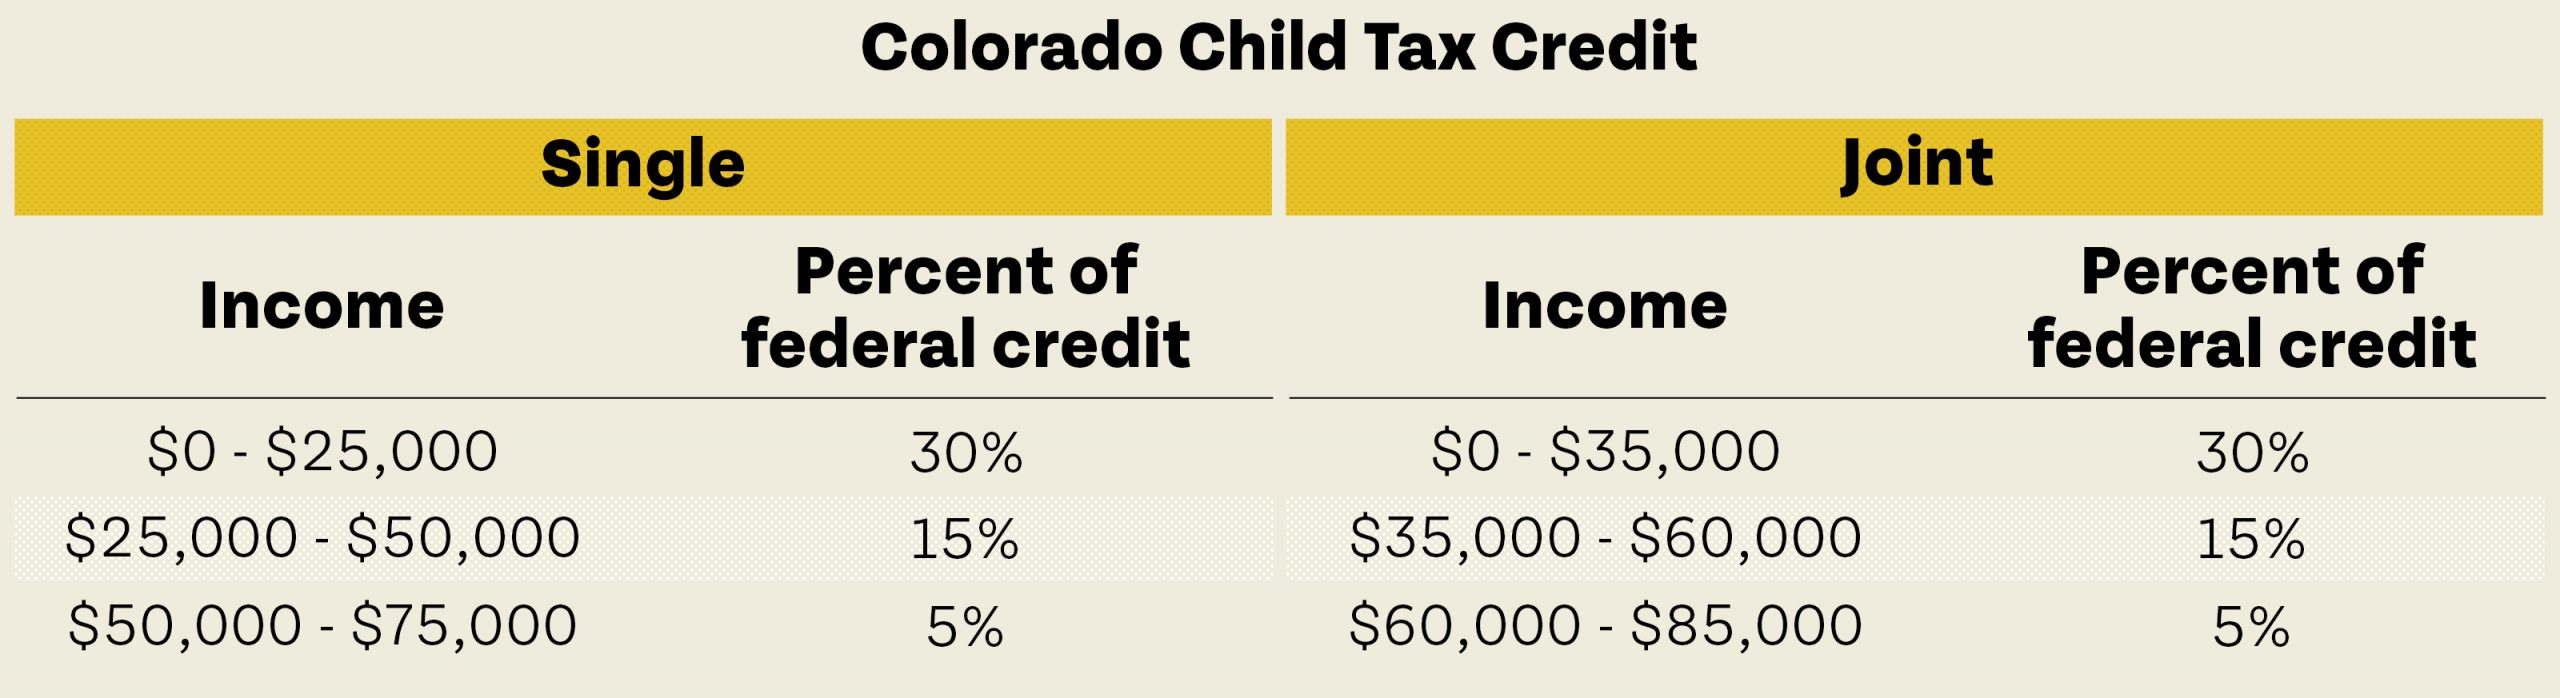 Chart showing Colorado Child Tax Credit for single and joint parents 